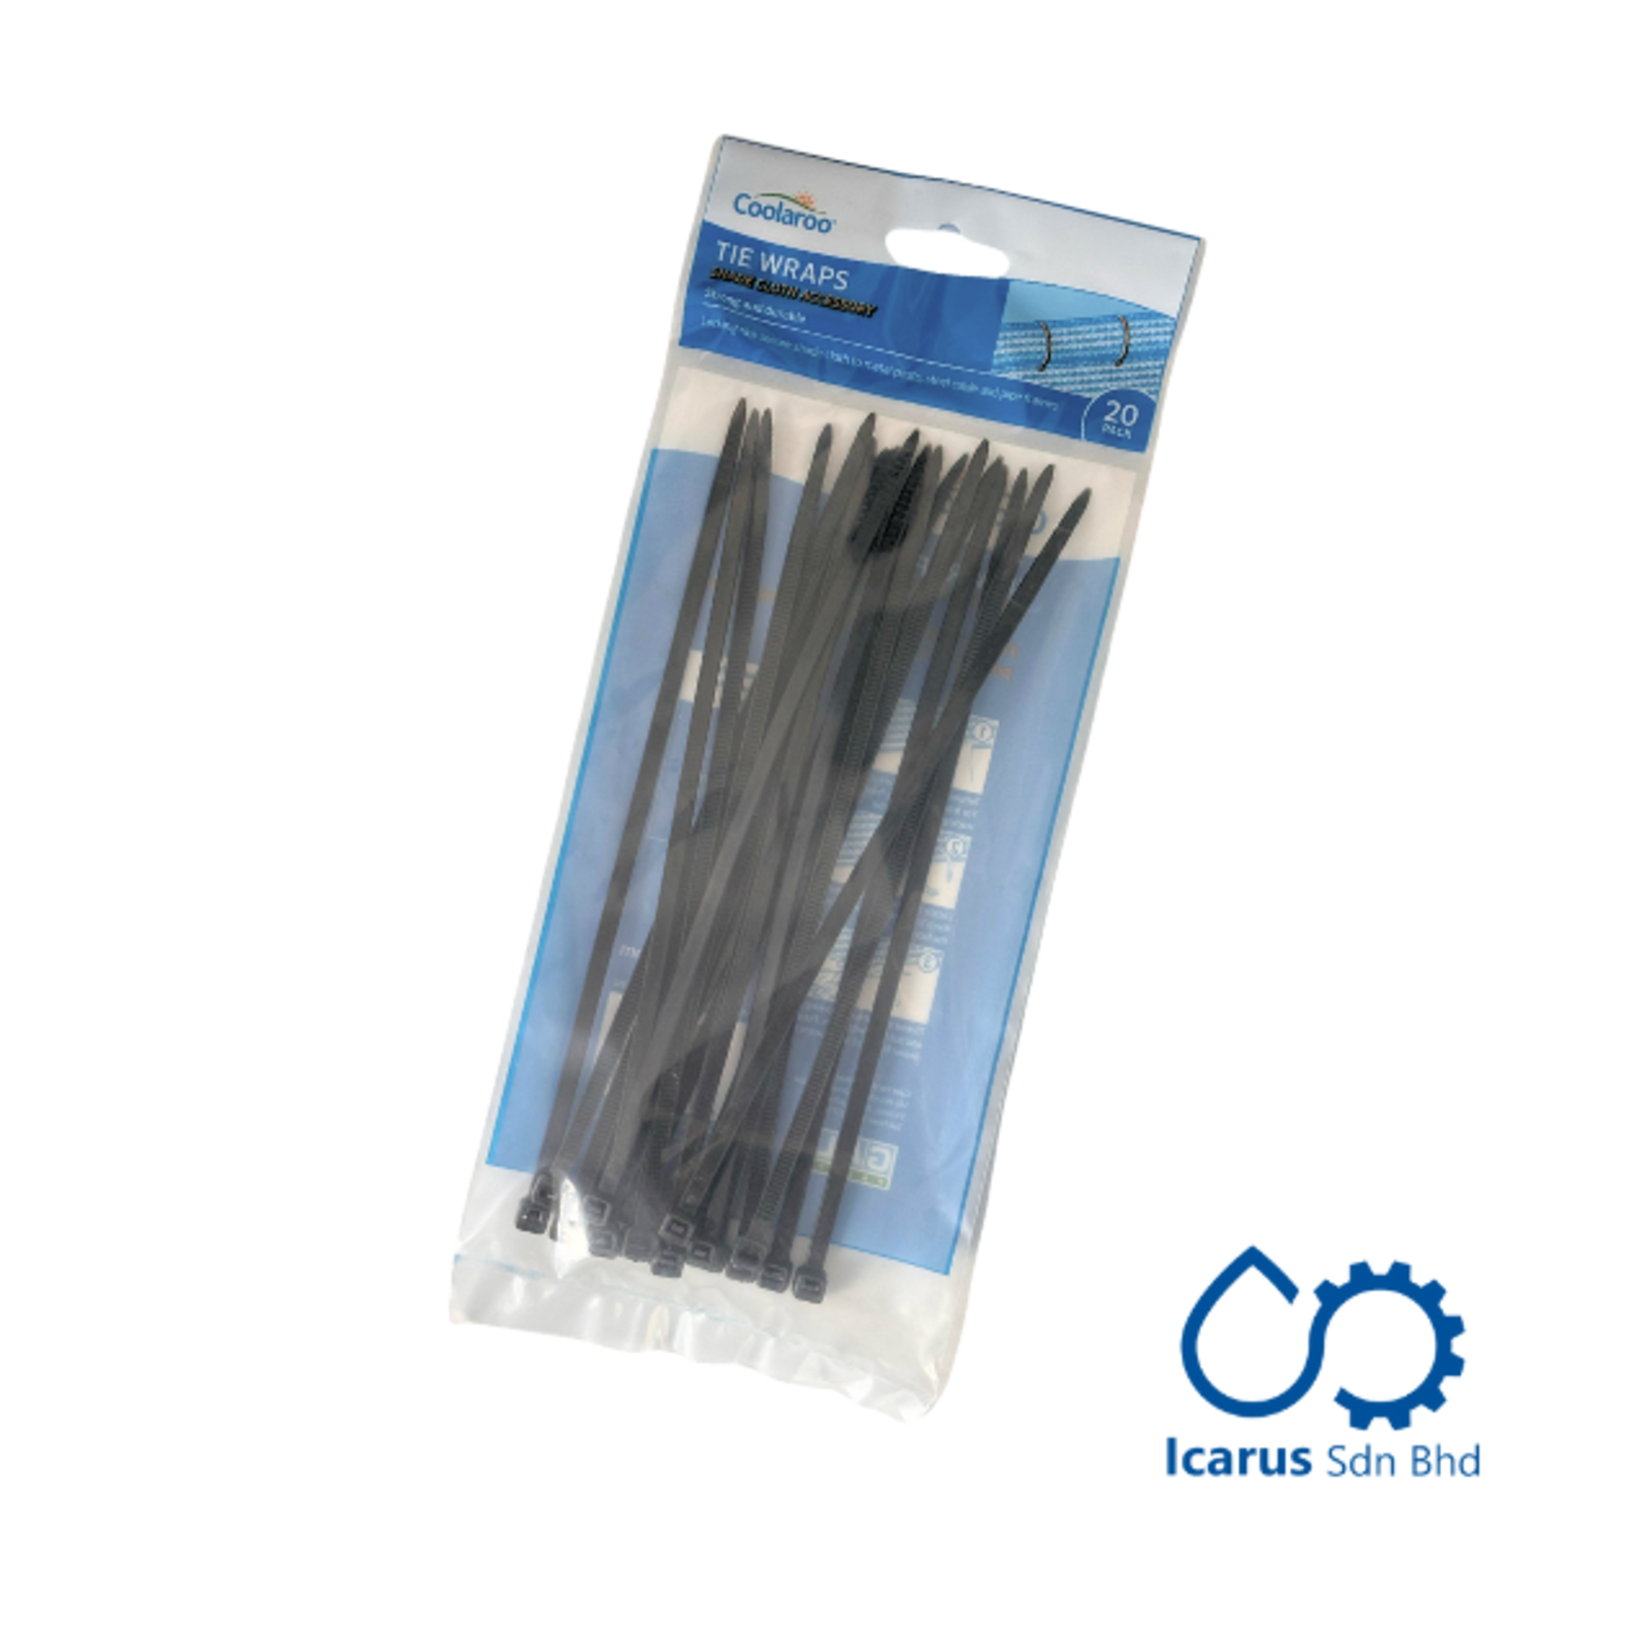 Coolaroo Shade cloth Tie Wraps/ Black Cable Tie- 20 Pack (Width 4.8 mm, Height 200mm)